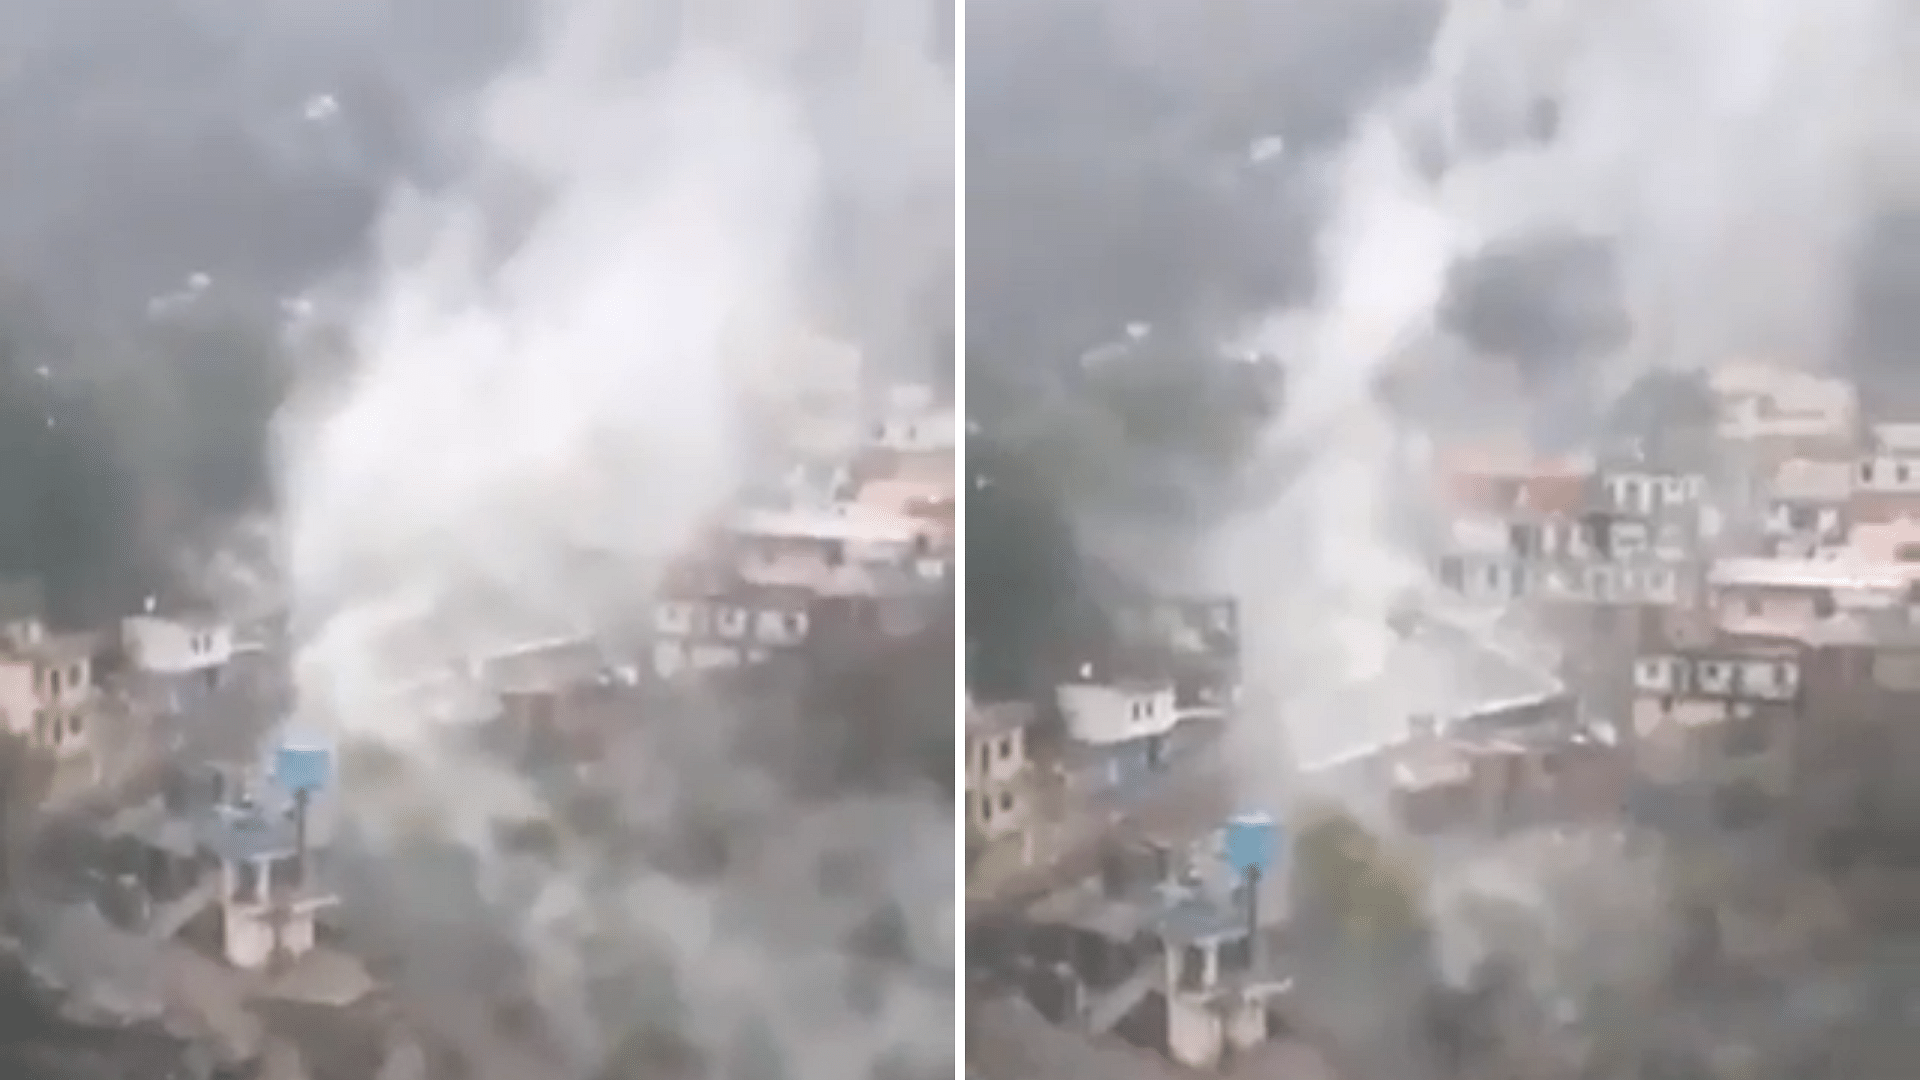 A cloudburst occurred in Uttarakhand’s Devprayag around 5 pm on Tuesday, 11 May, leaving several shops and houses damaged. 